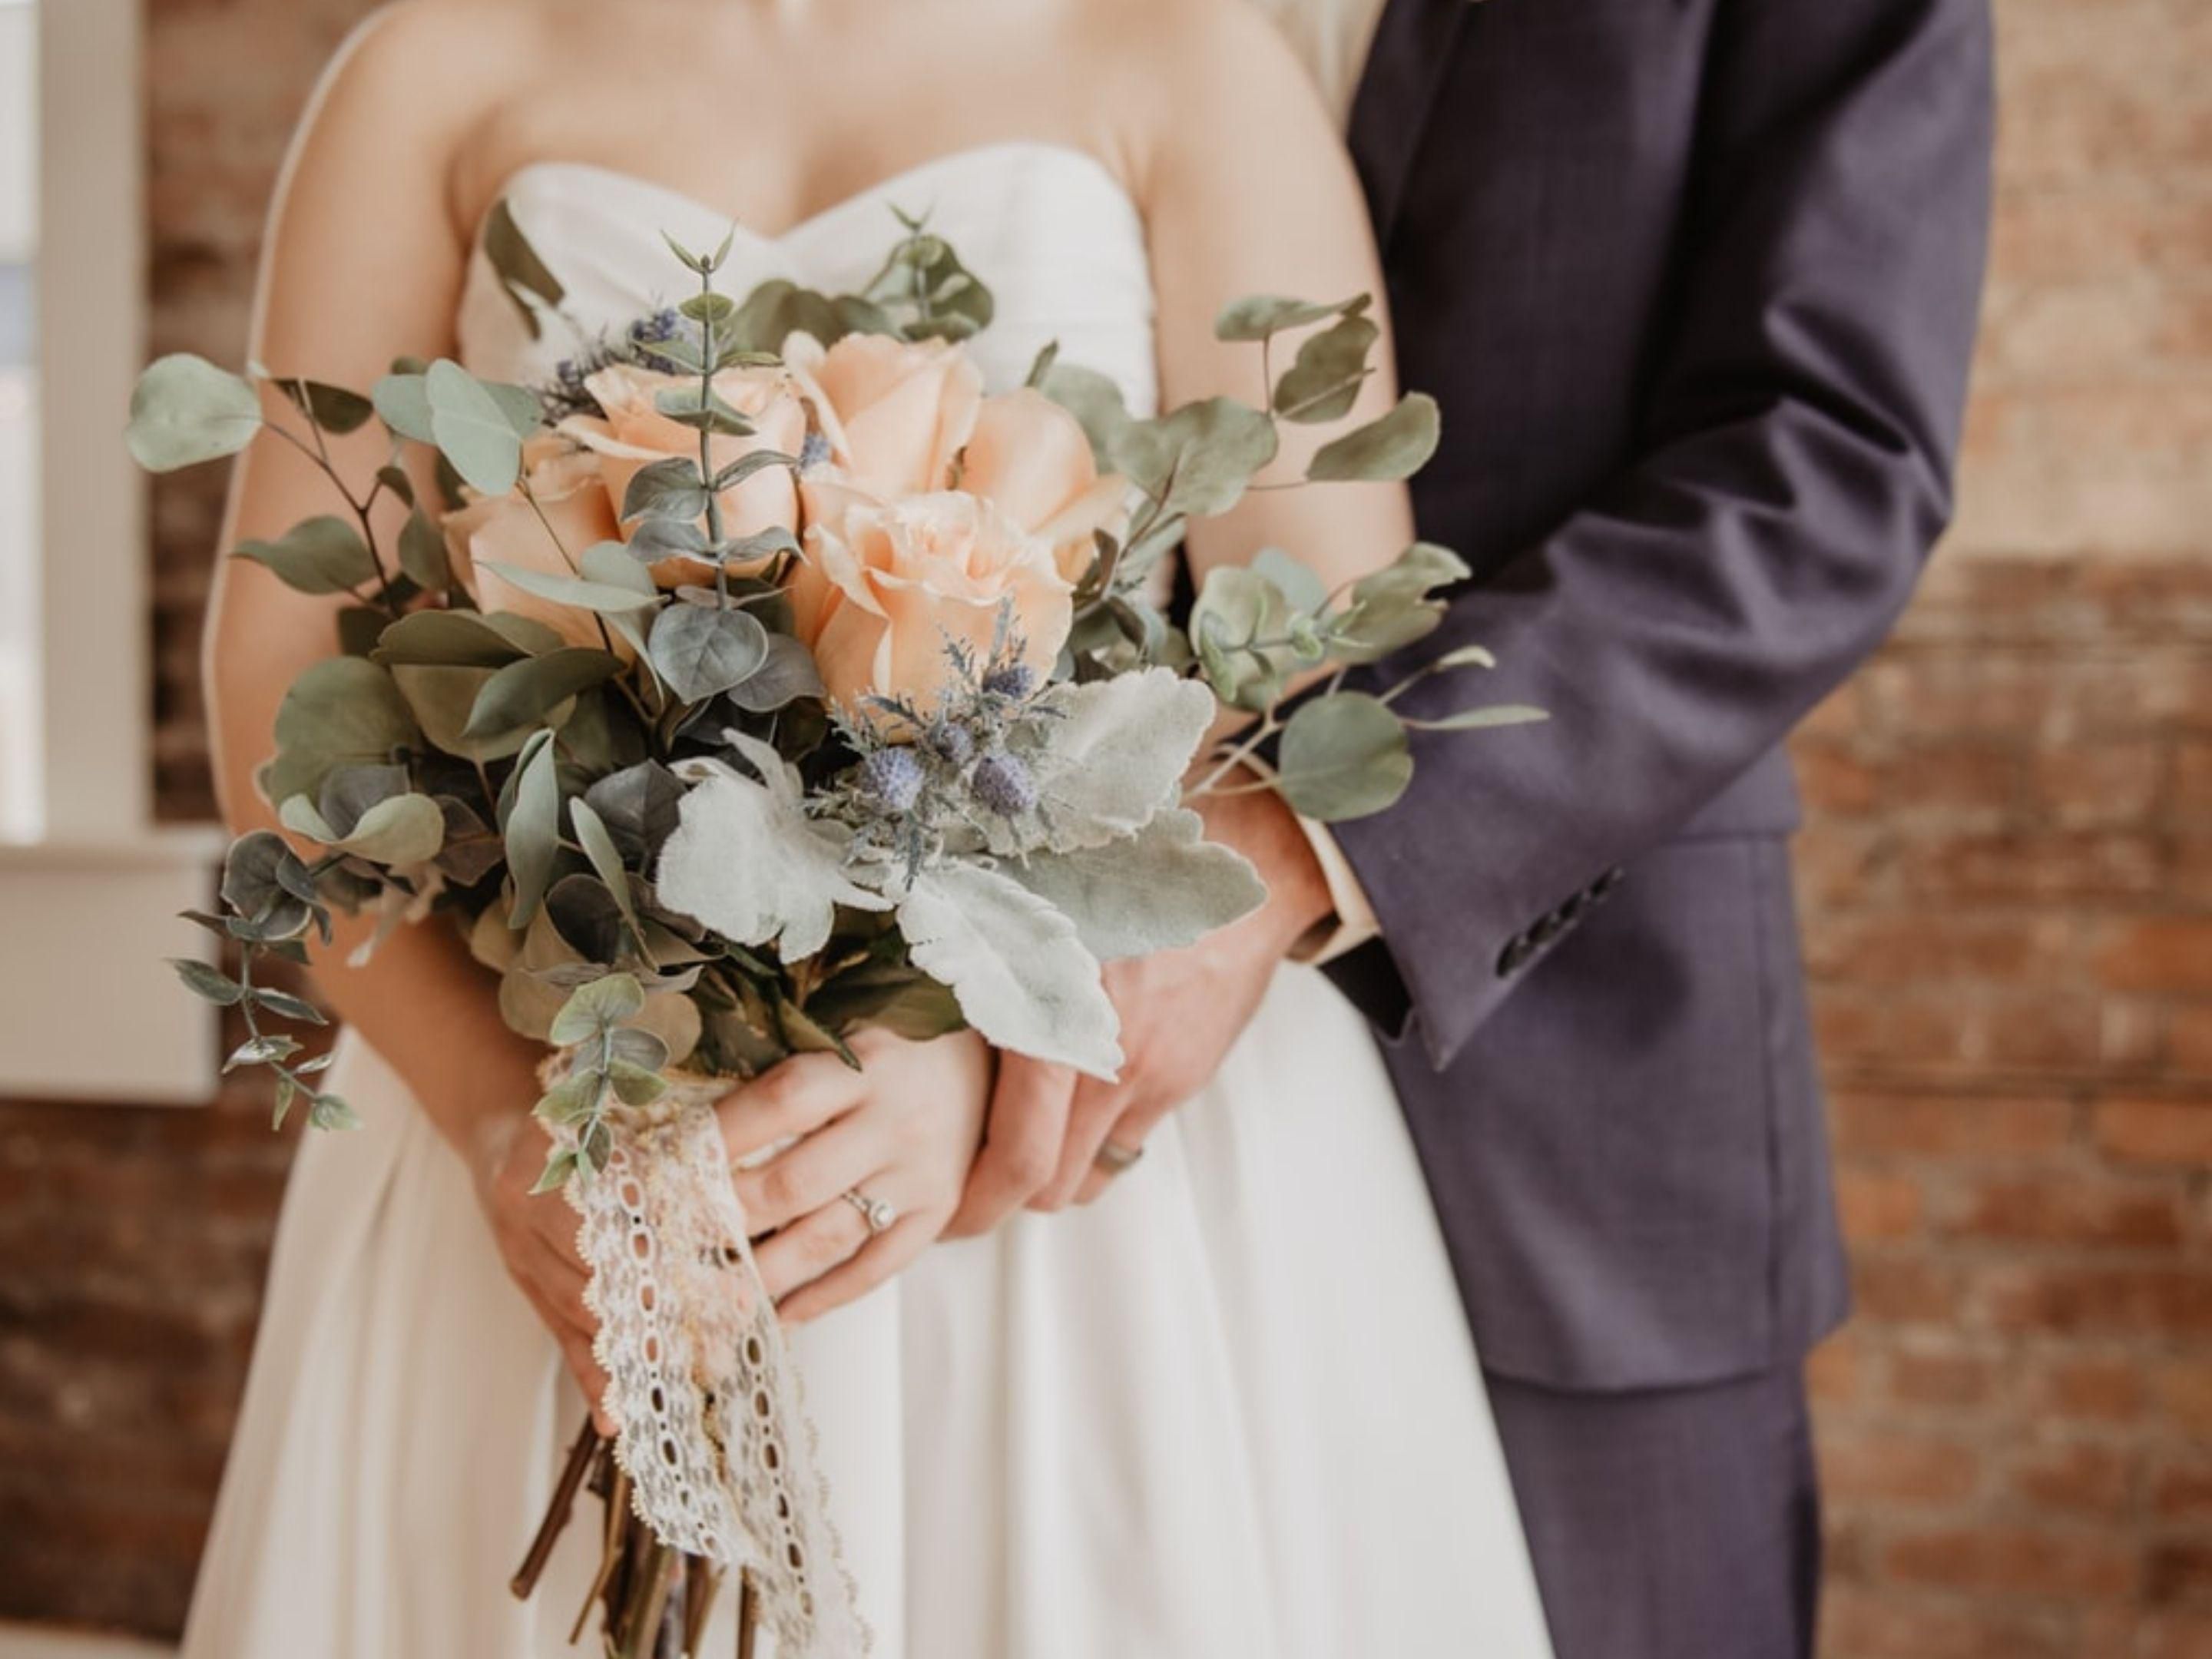 Getting married is such a special occasion and we know that choosing the right venue is just as important. Our hotel has a lot to offer and we’re looking forward to ensuring that your day is truly your day, your way. 